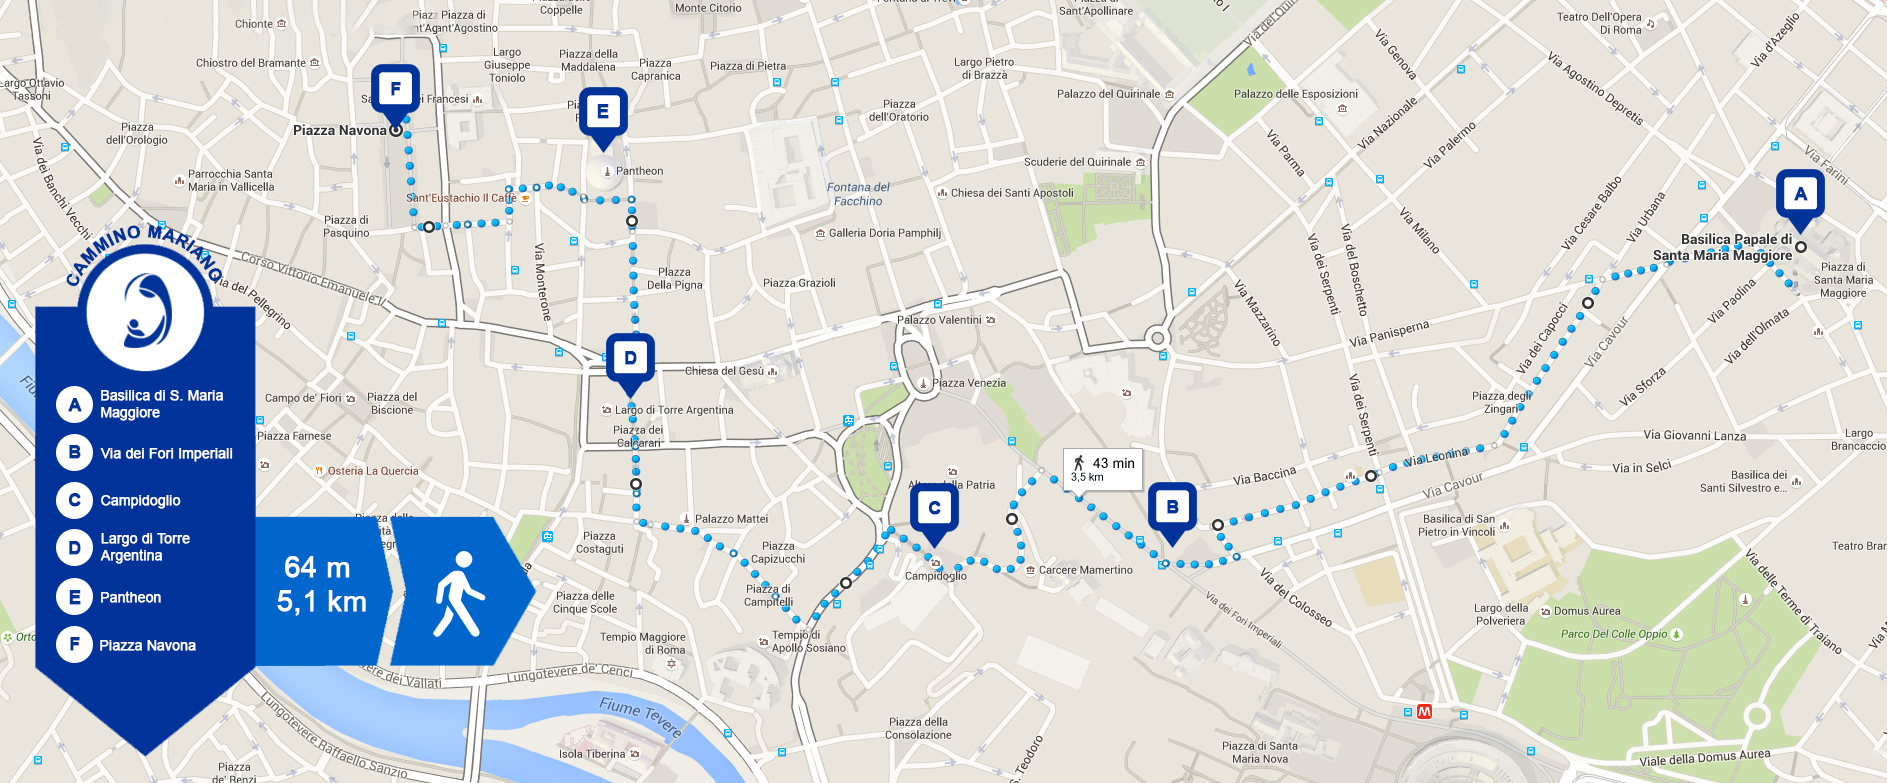 Holy Year 2015: map and main stages of the Marian way